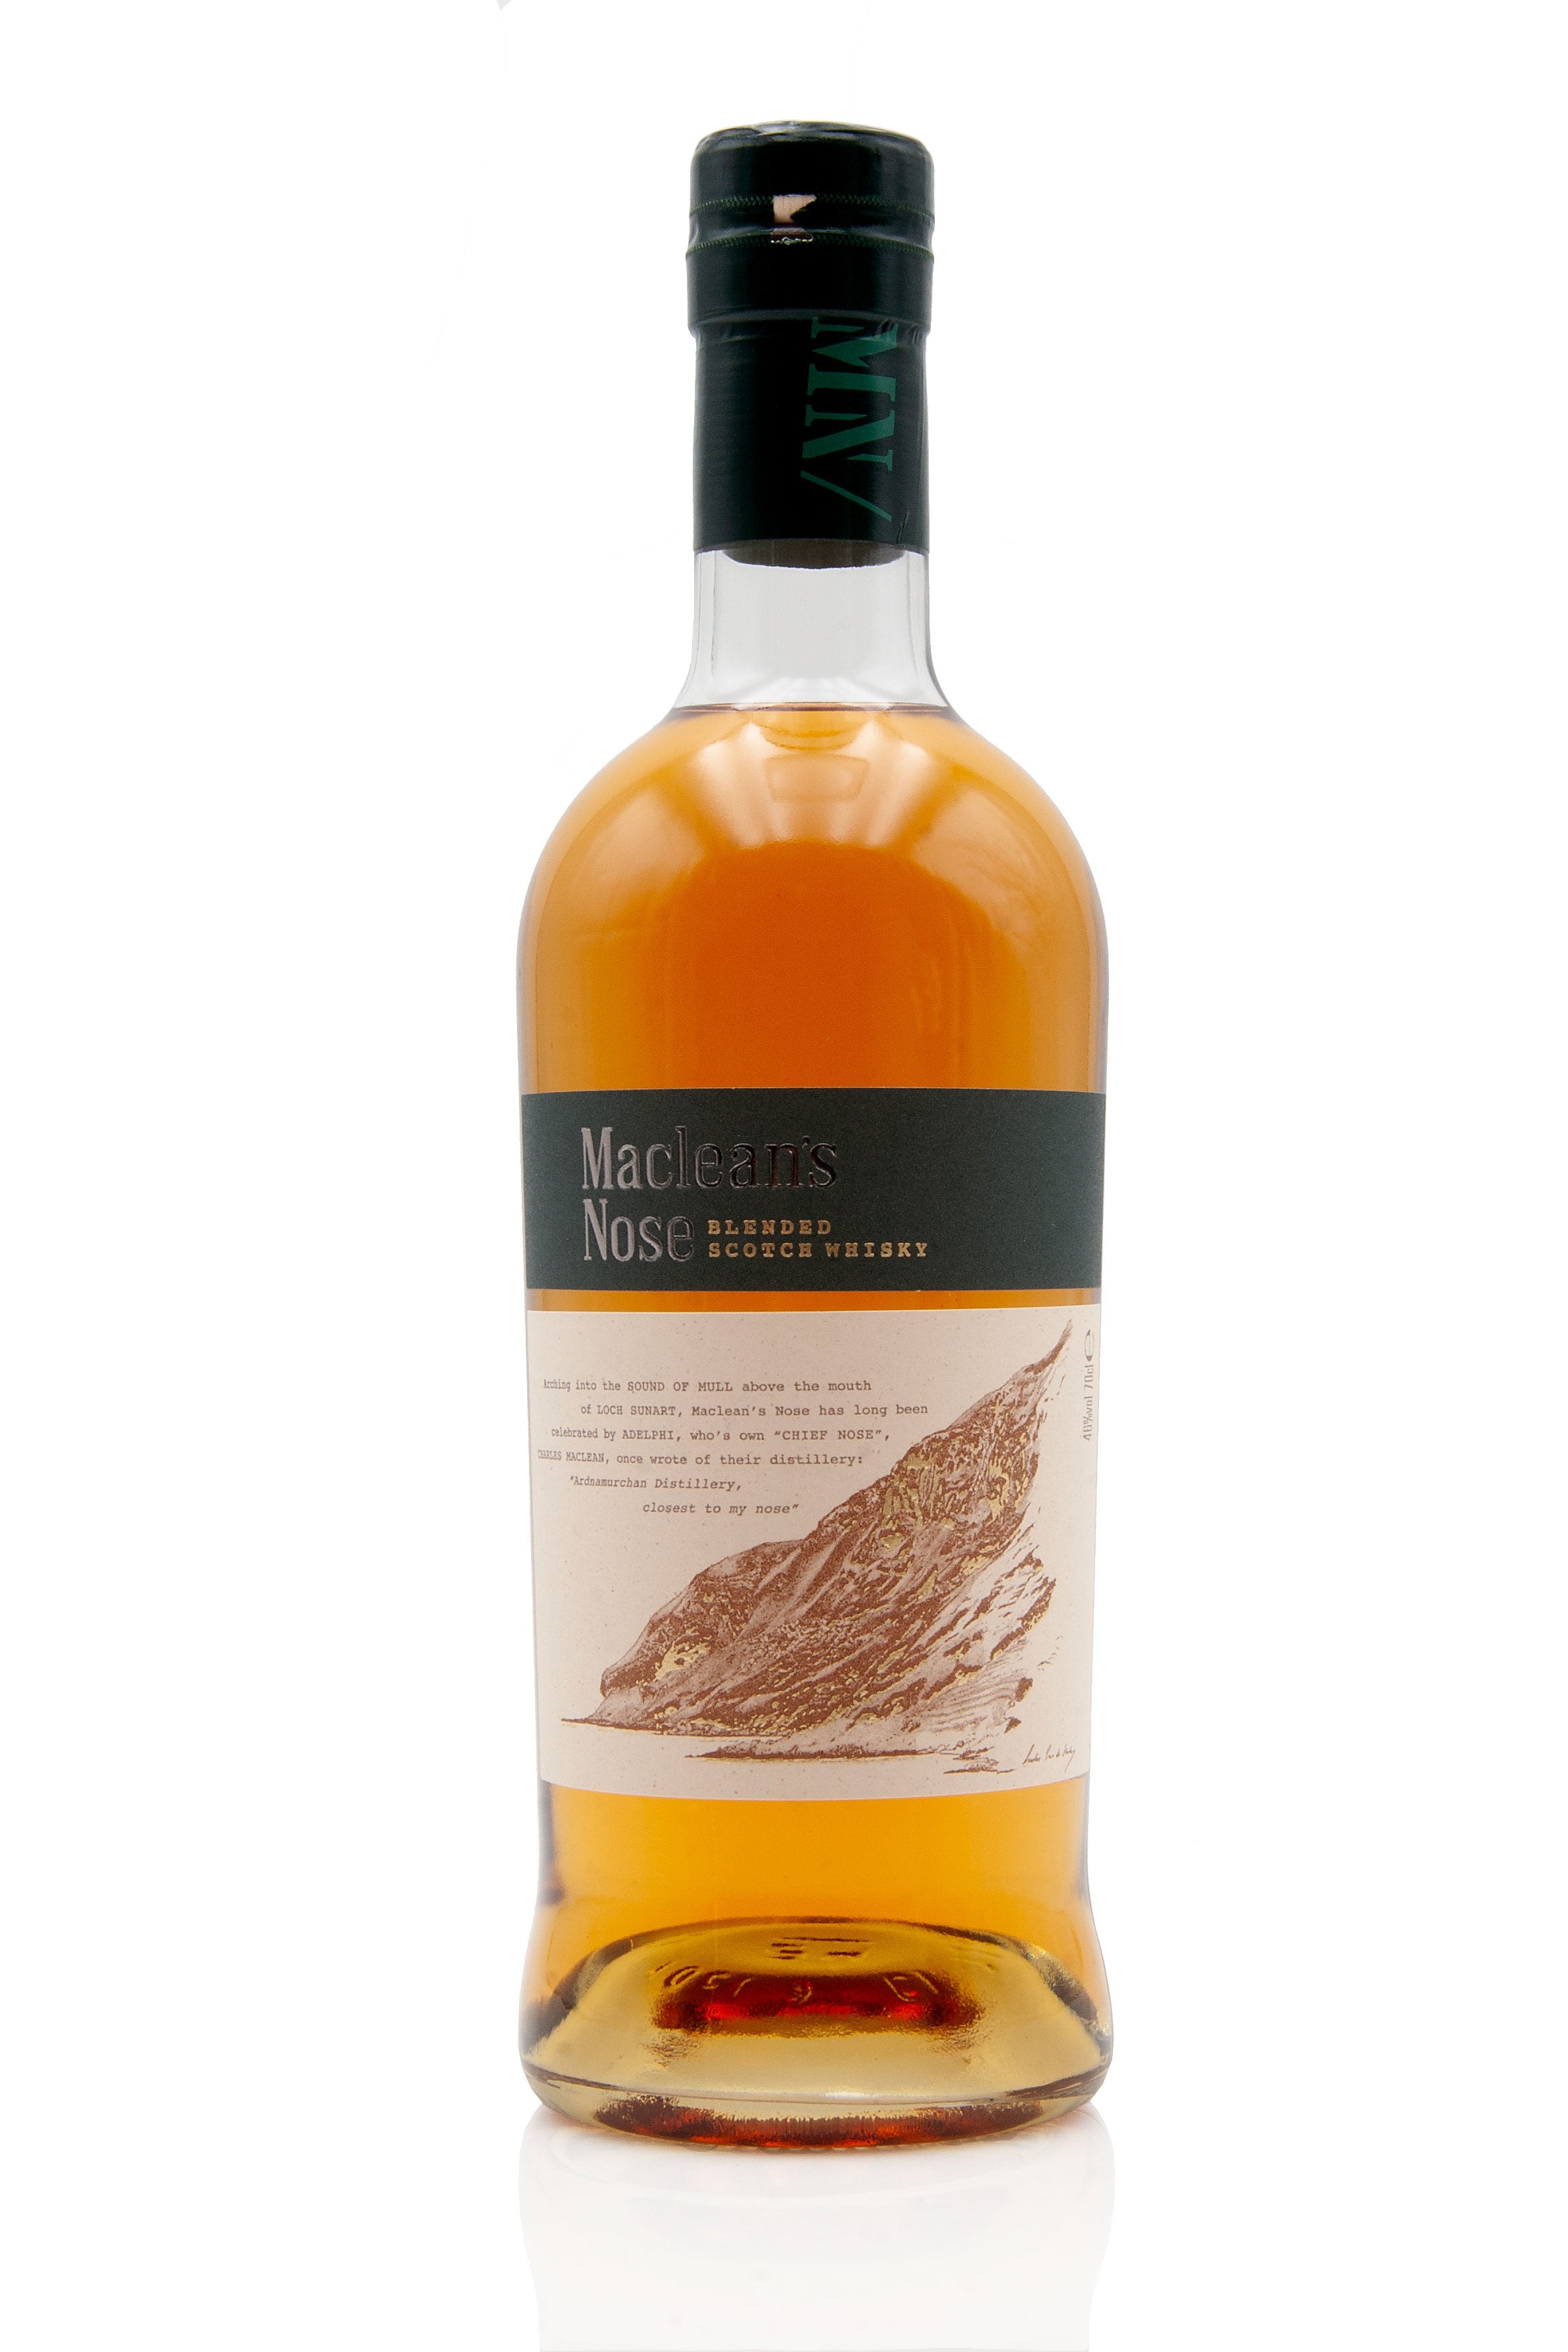 Maclean's Nose Blended Scotch Whisky | Abbey Whisky Online